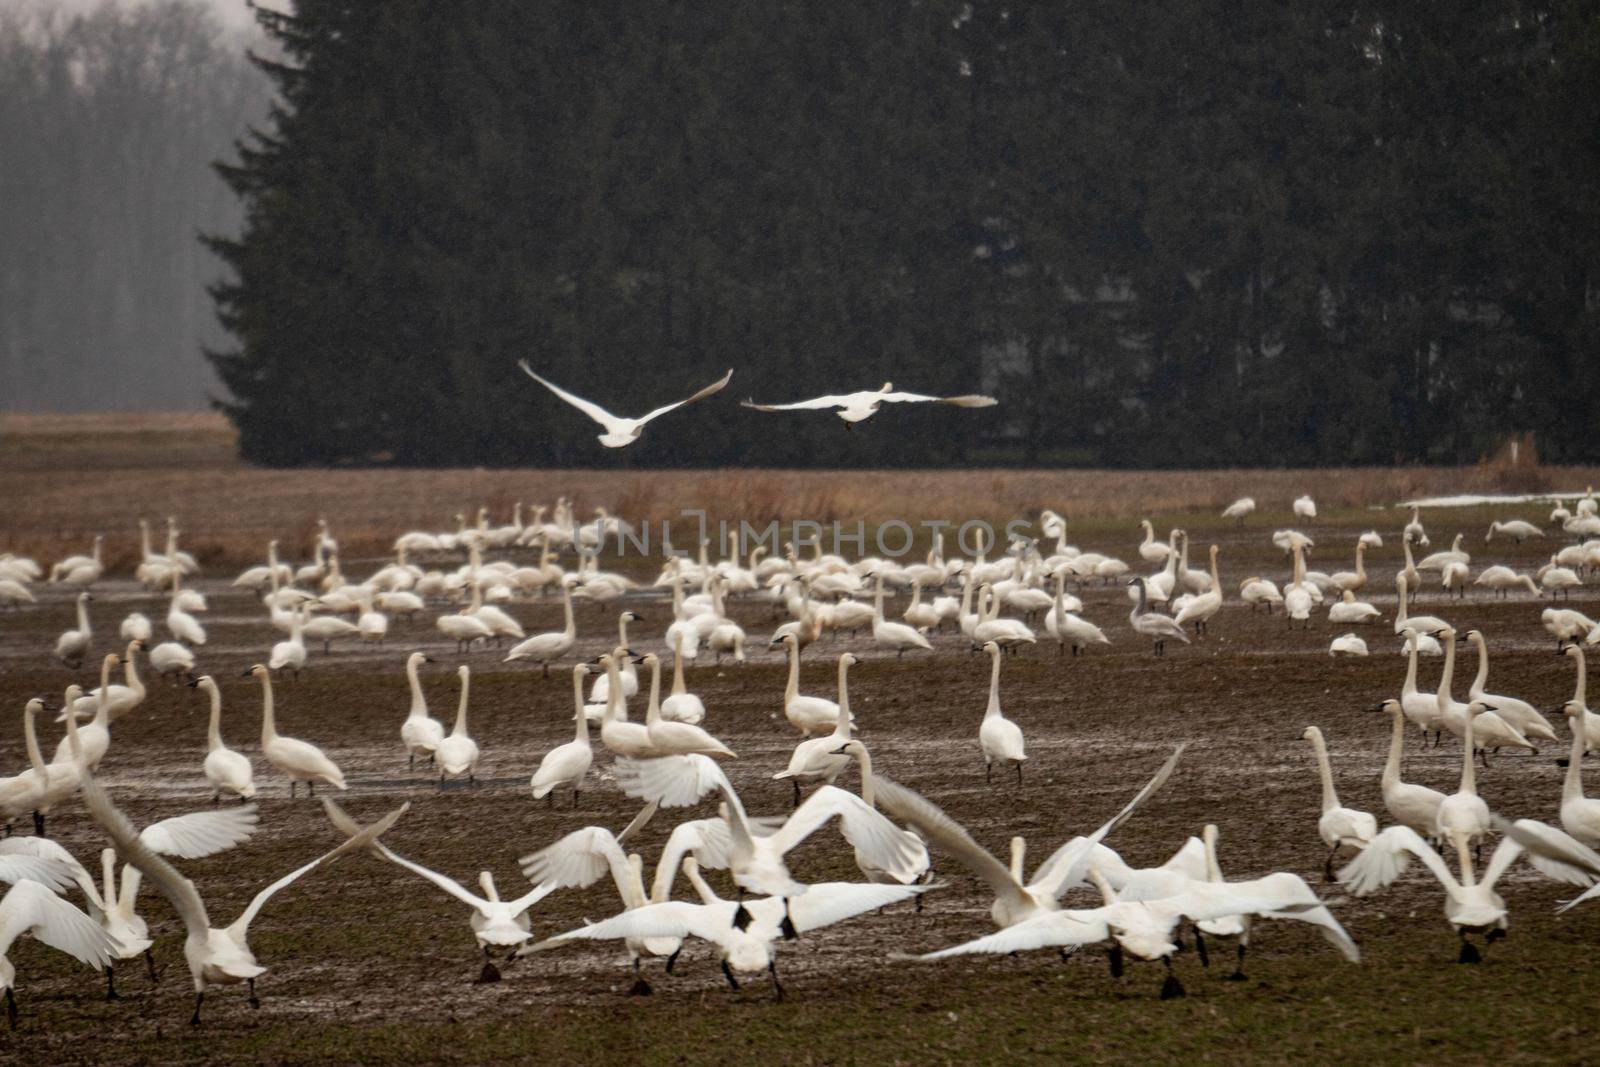 Tundra swans accumulating on a farmers field during winter migrations  by mynewturtle1